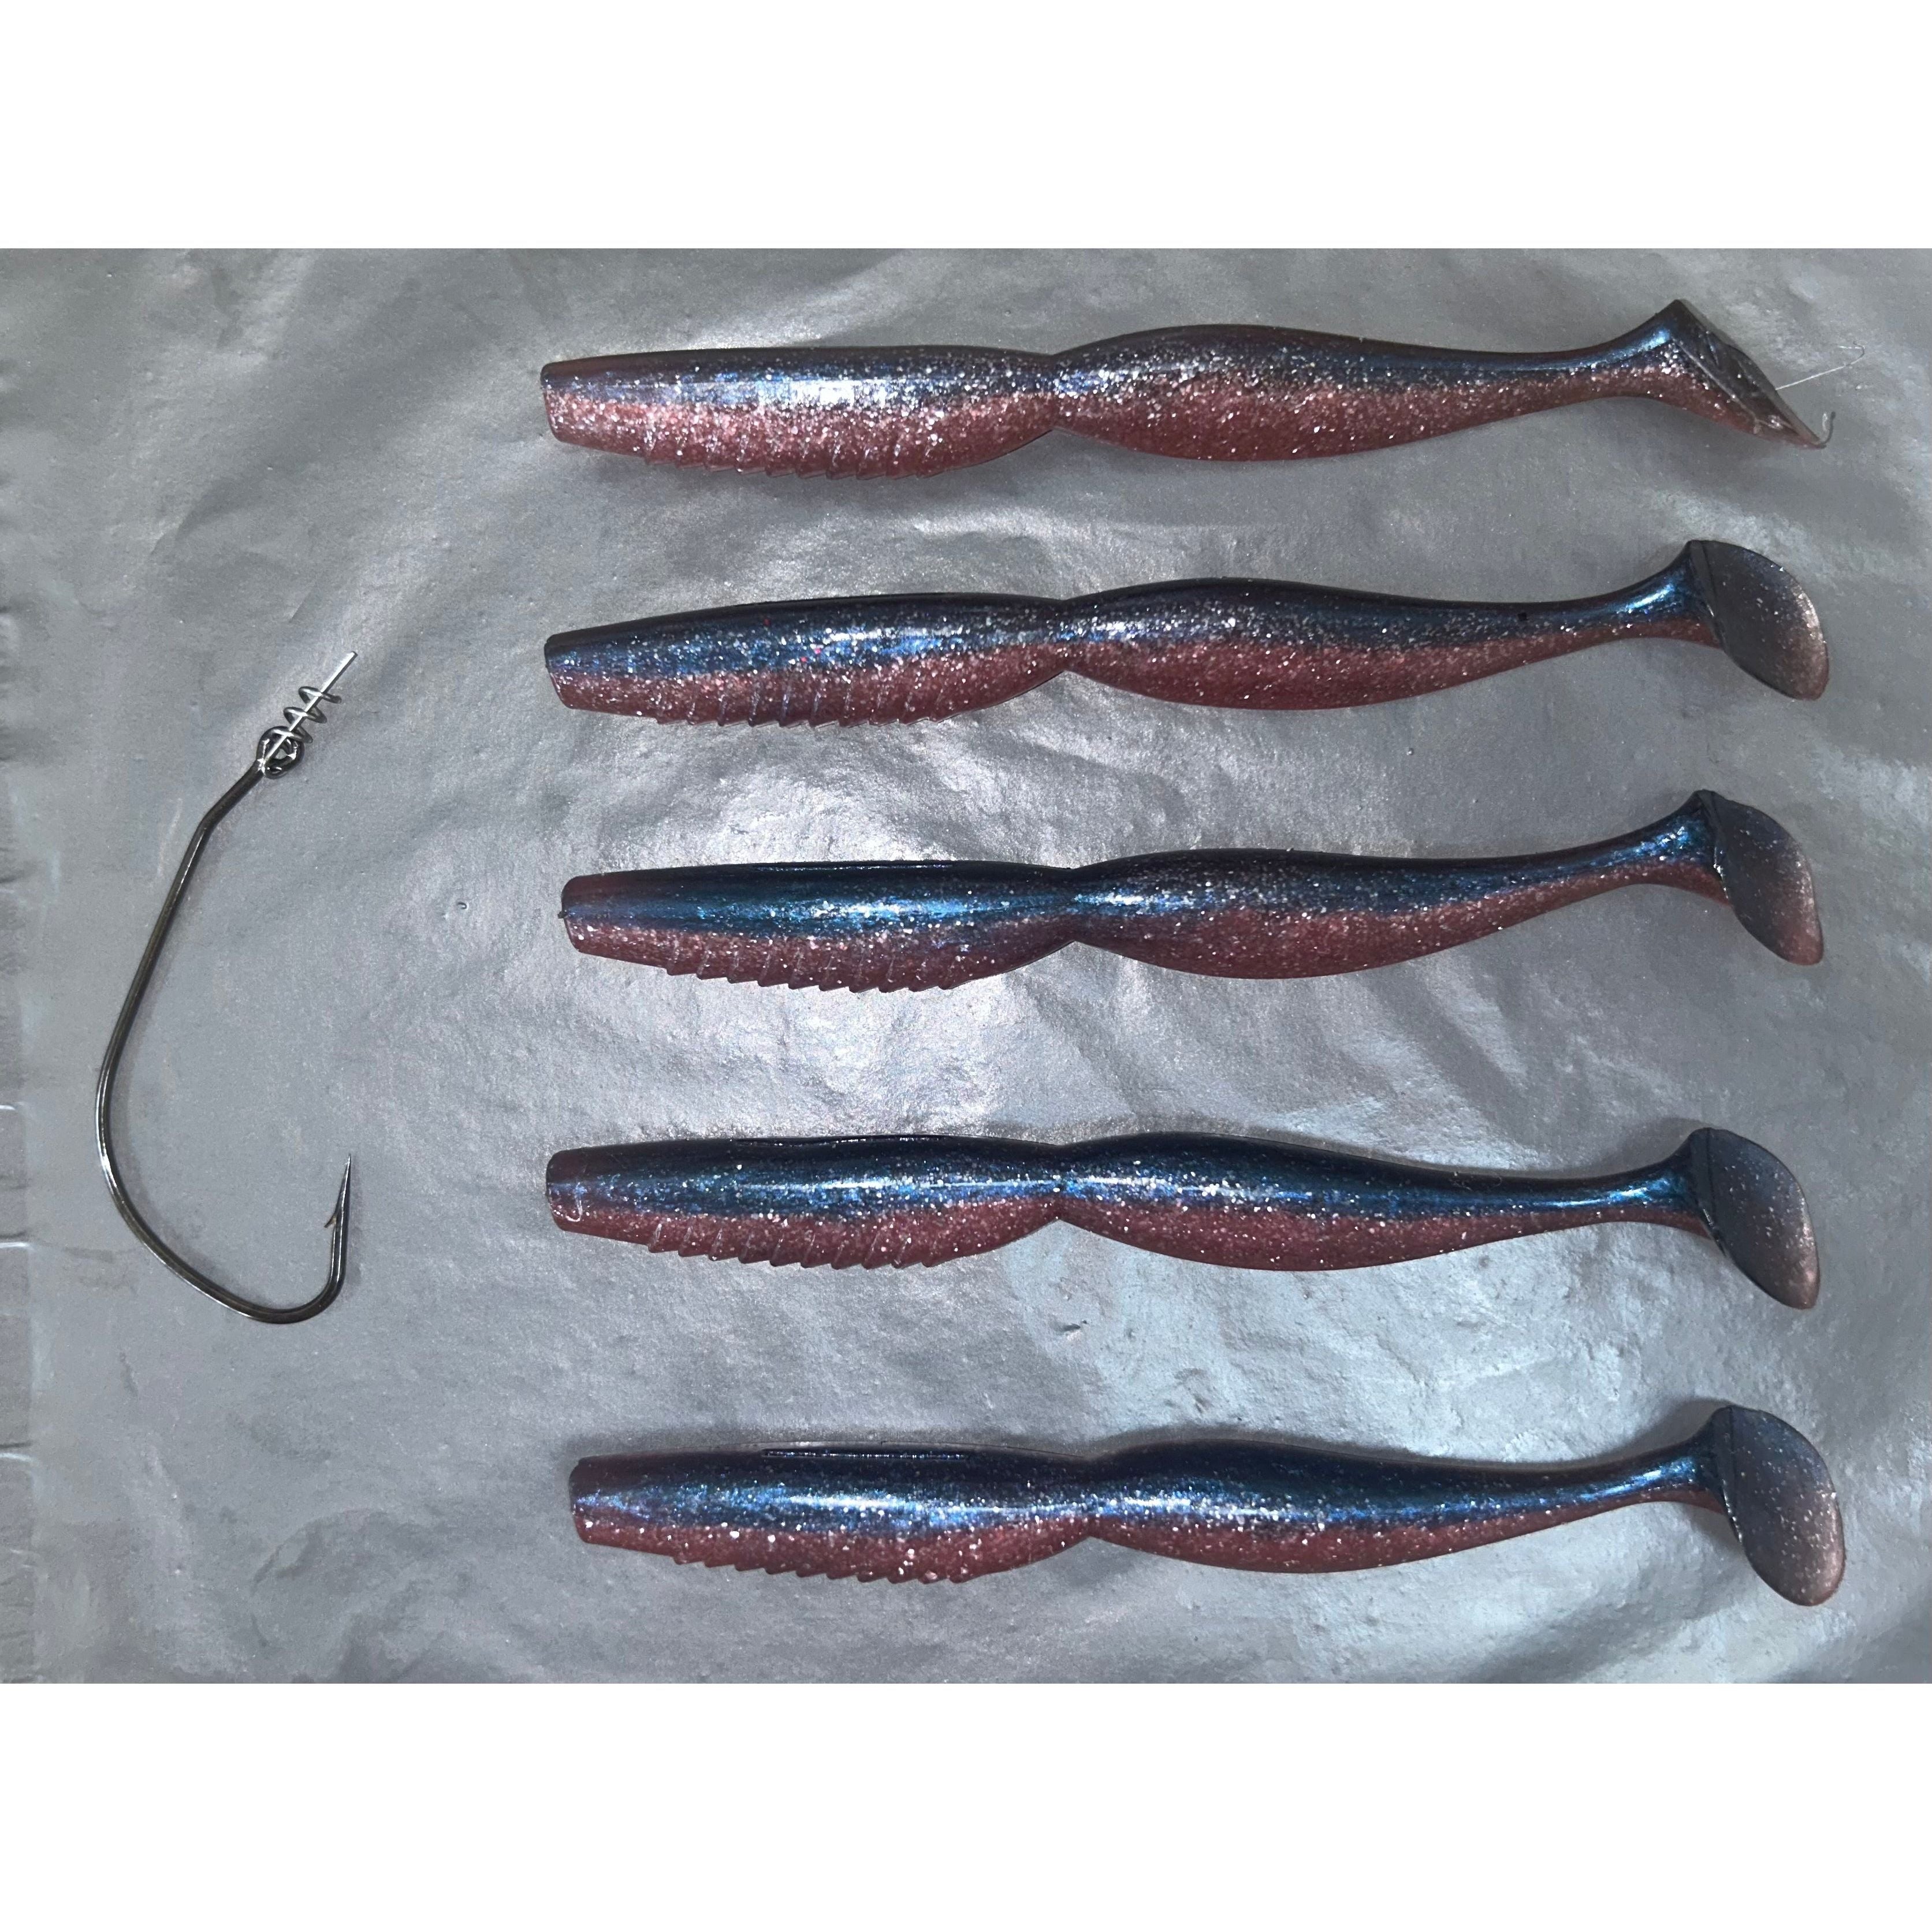 Bass Lures UK - Soft Plastic Lure Sets for Bass